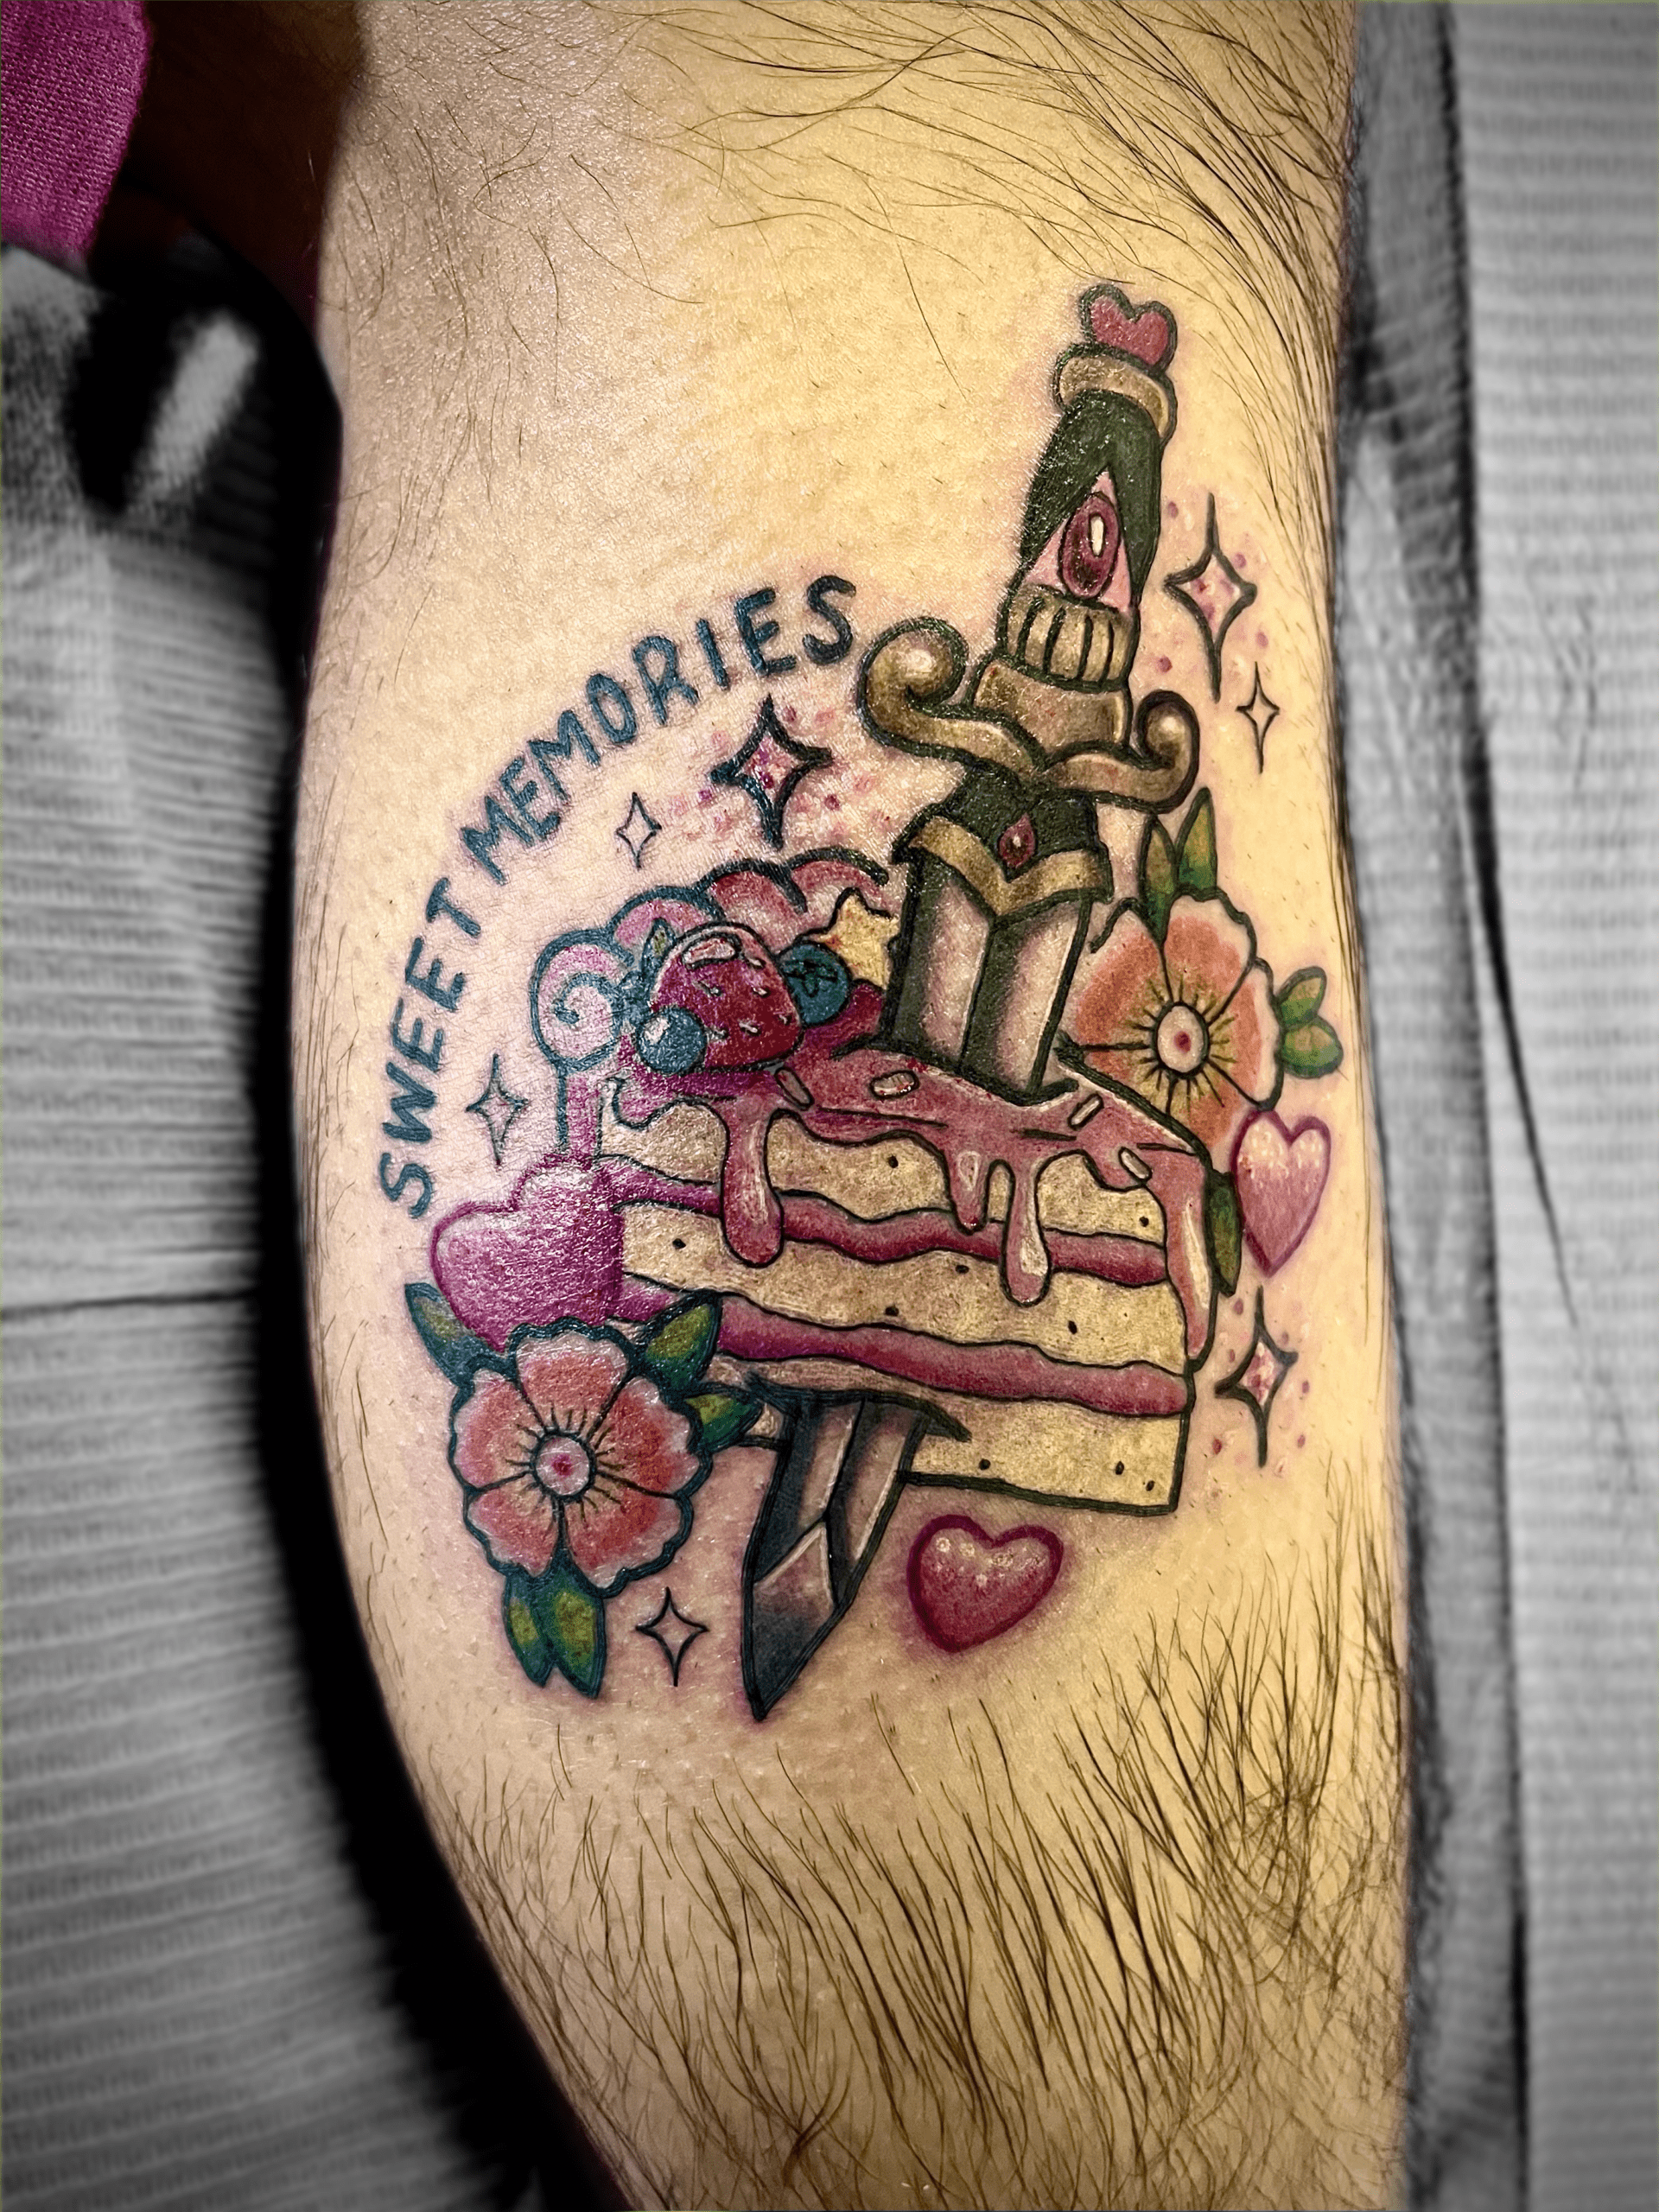 Tony's birthday cake. Tattoo done @moonsharktattoo. 🎂 Aug bookings now  open for my personal studio. Don't forget to send me an em... | Instagram